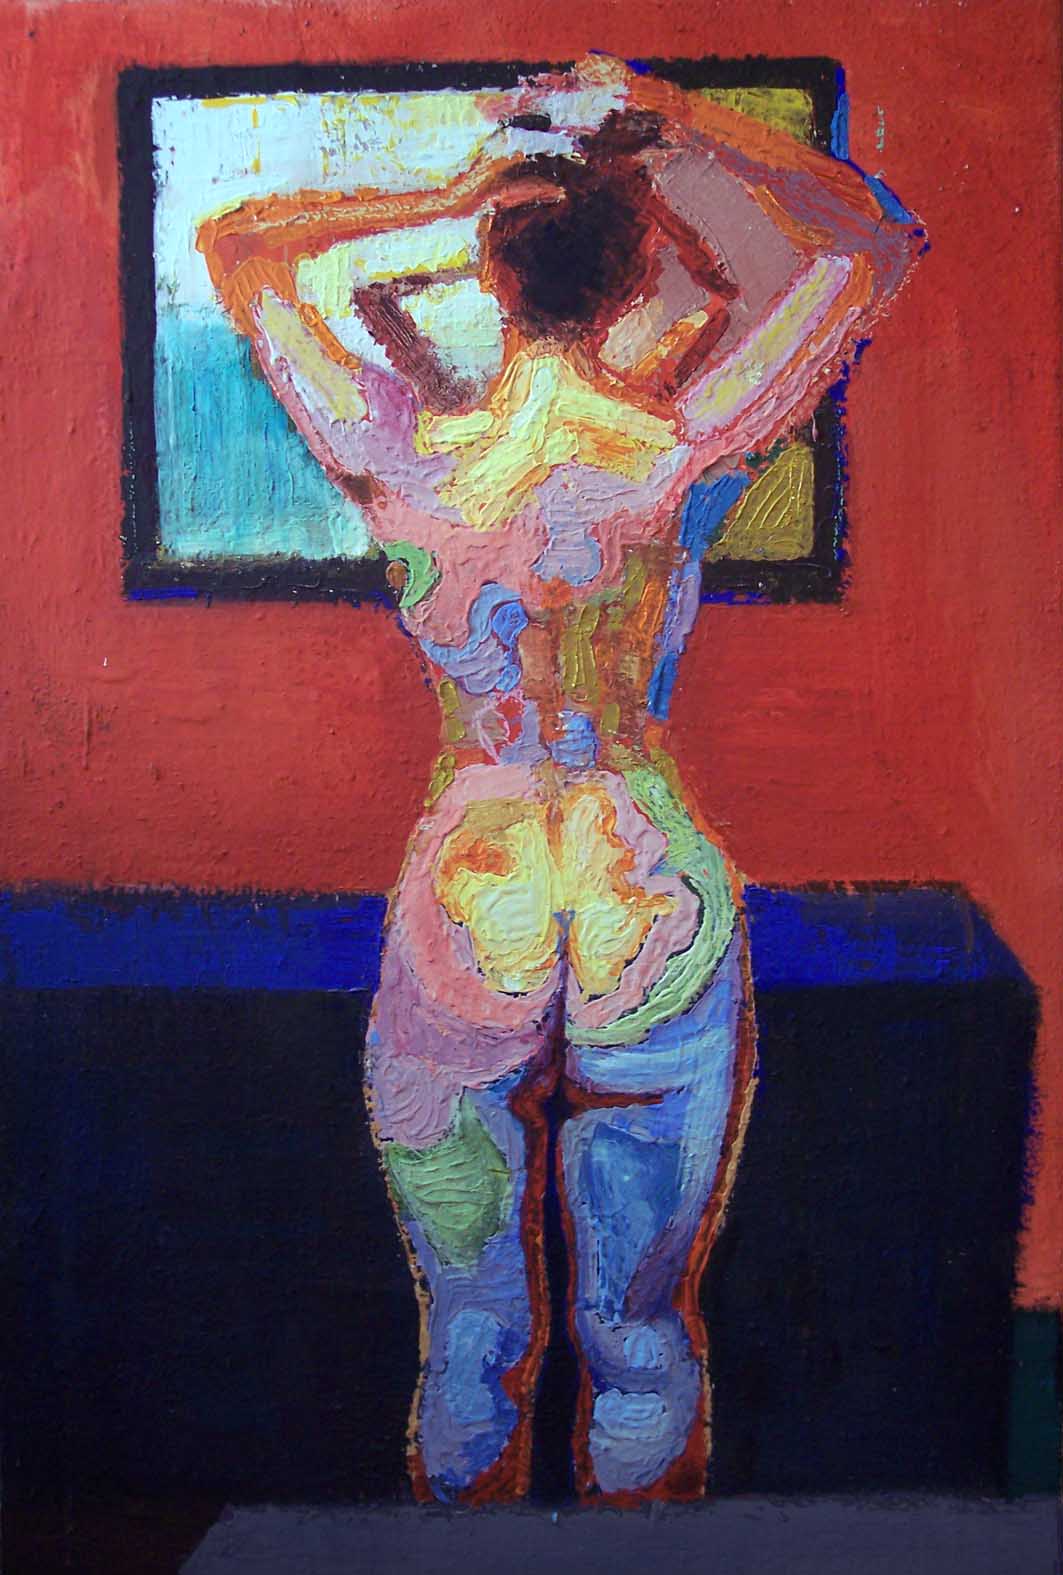 Fabio Modica | At the mirror - cm 60x90 | 23,6x35,4 inches - mixed media on jute | Private Collection - London | SOLD